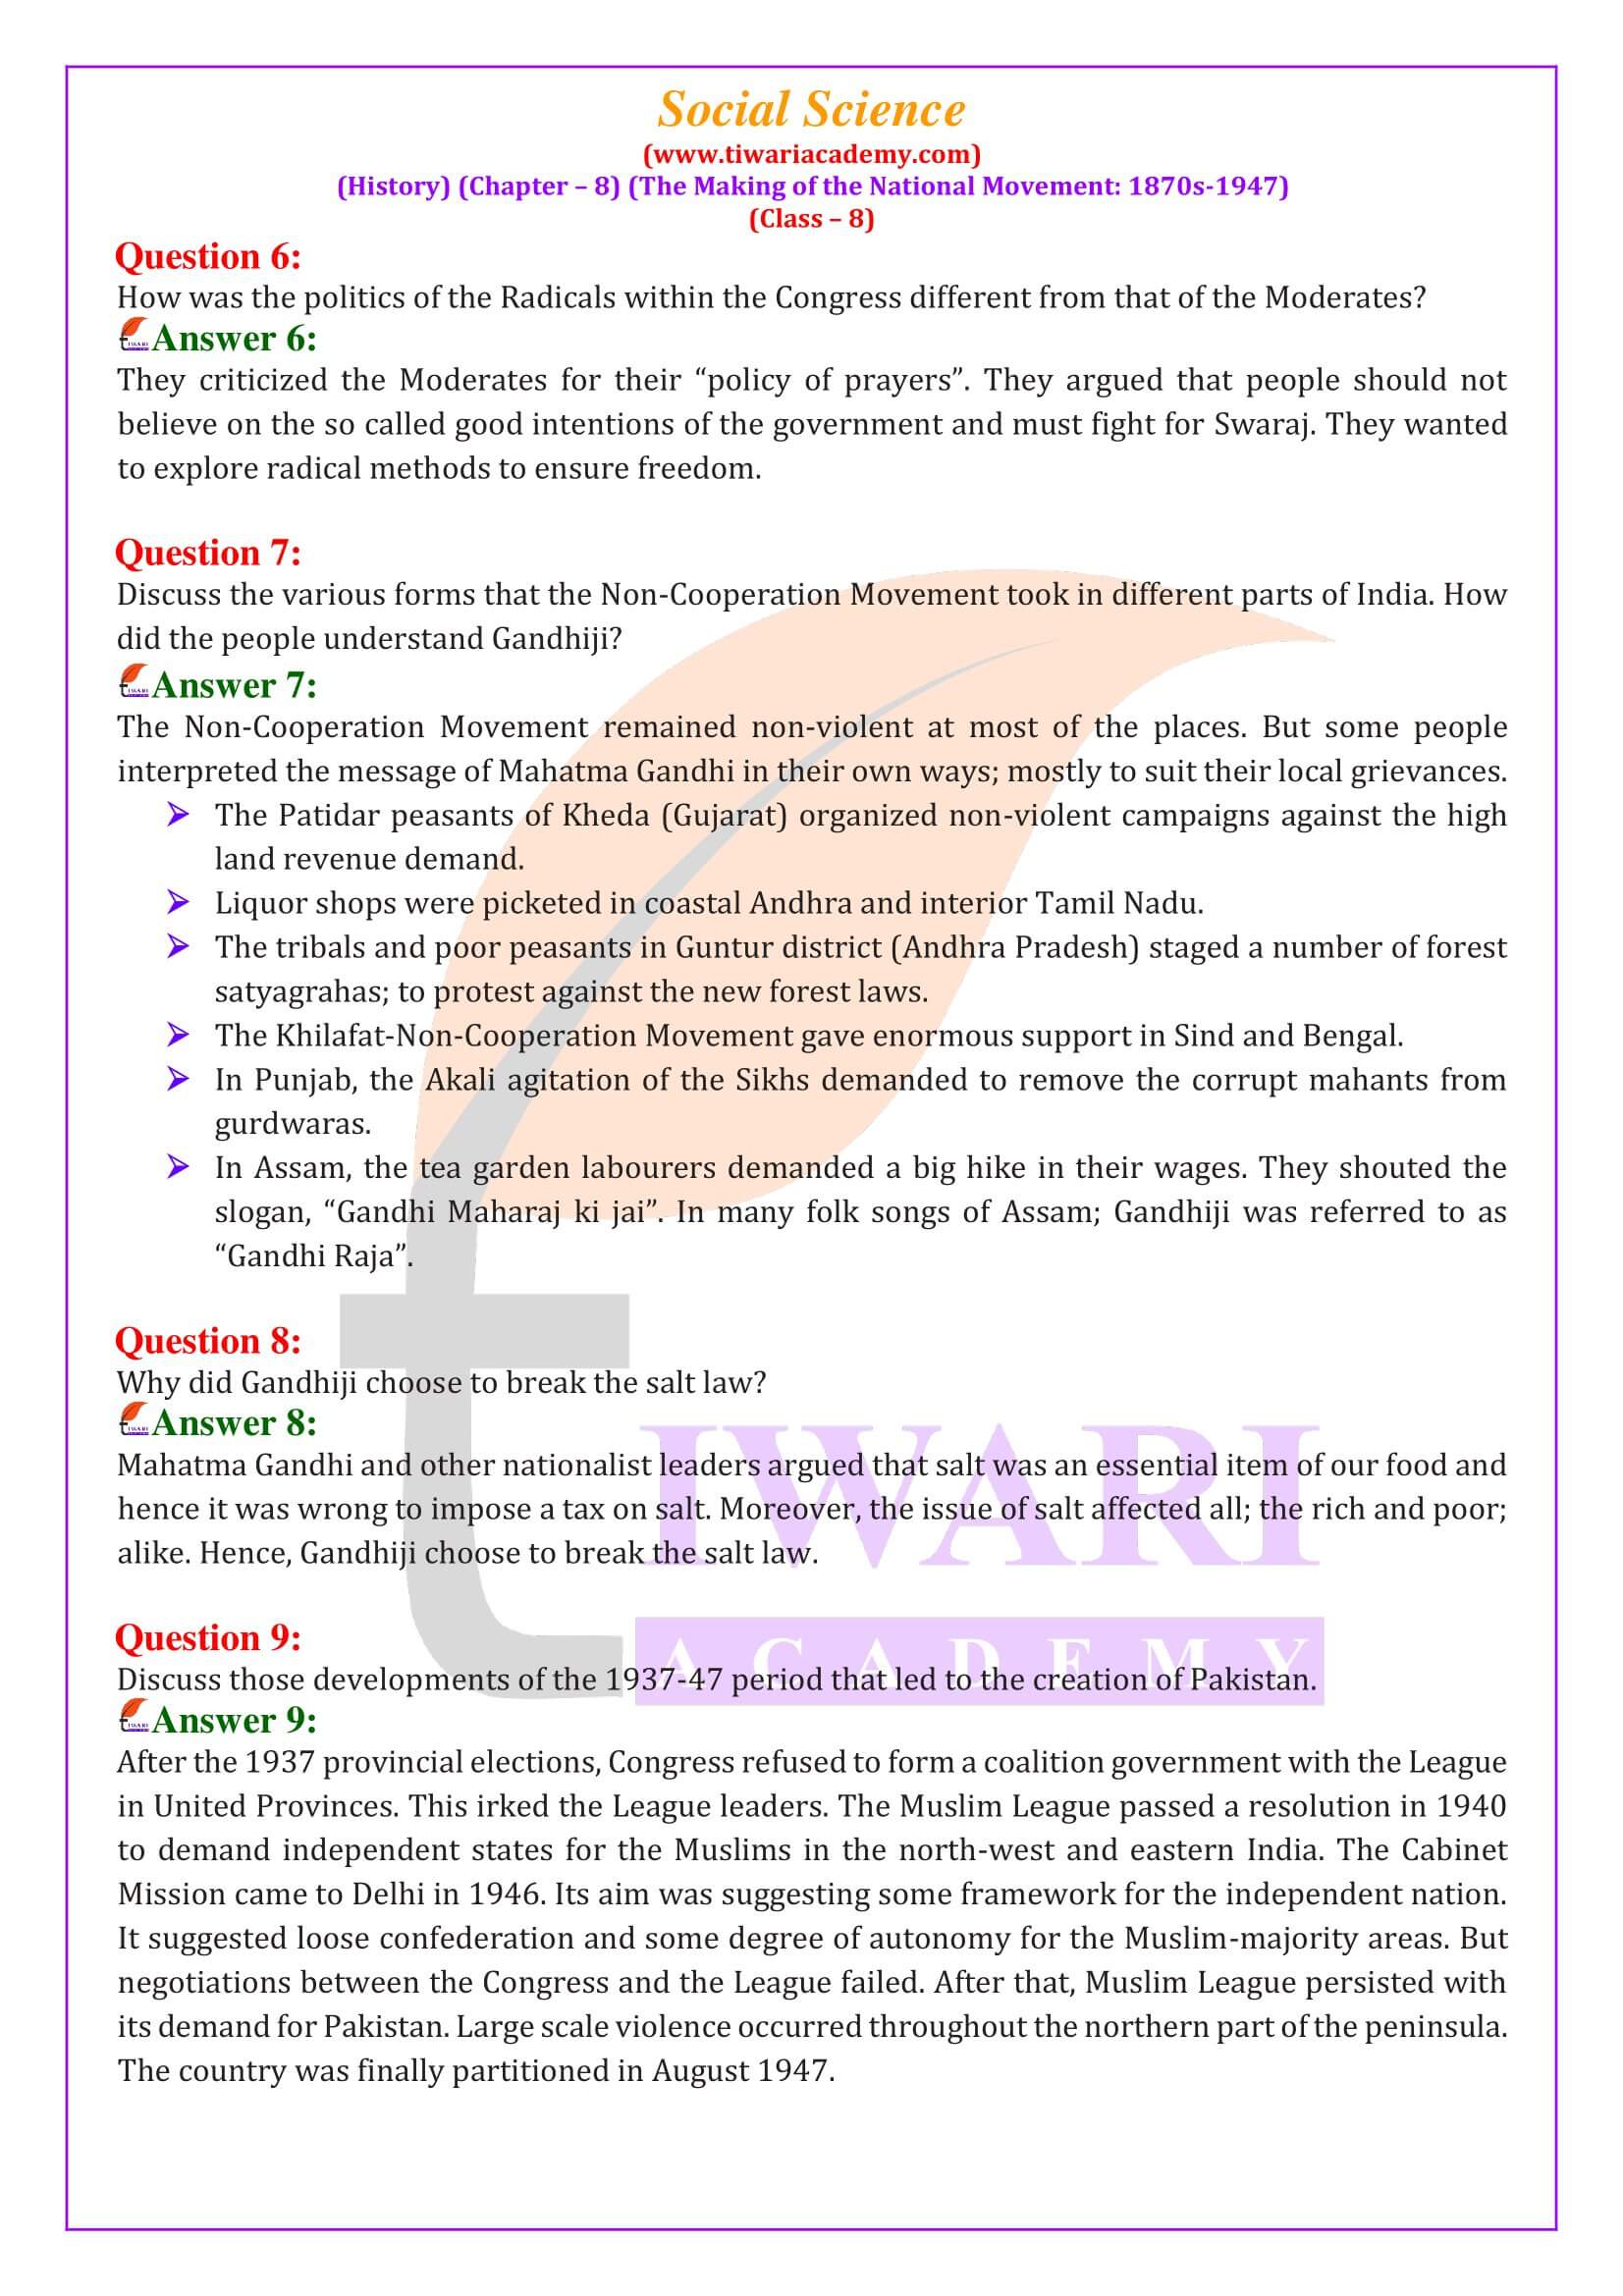 Class 8 Social Science History Chapter 8 The Making of the National Movement